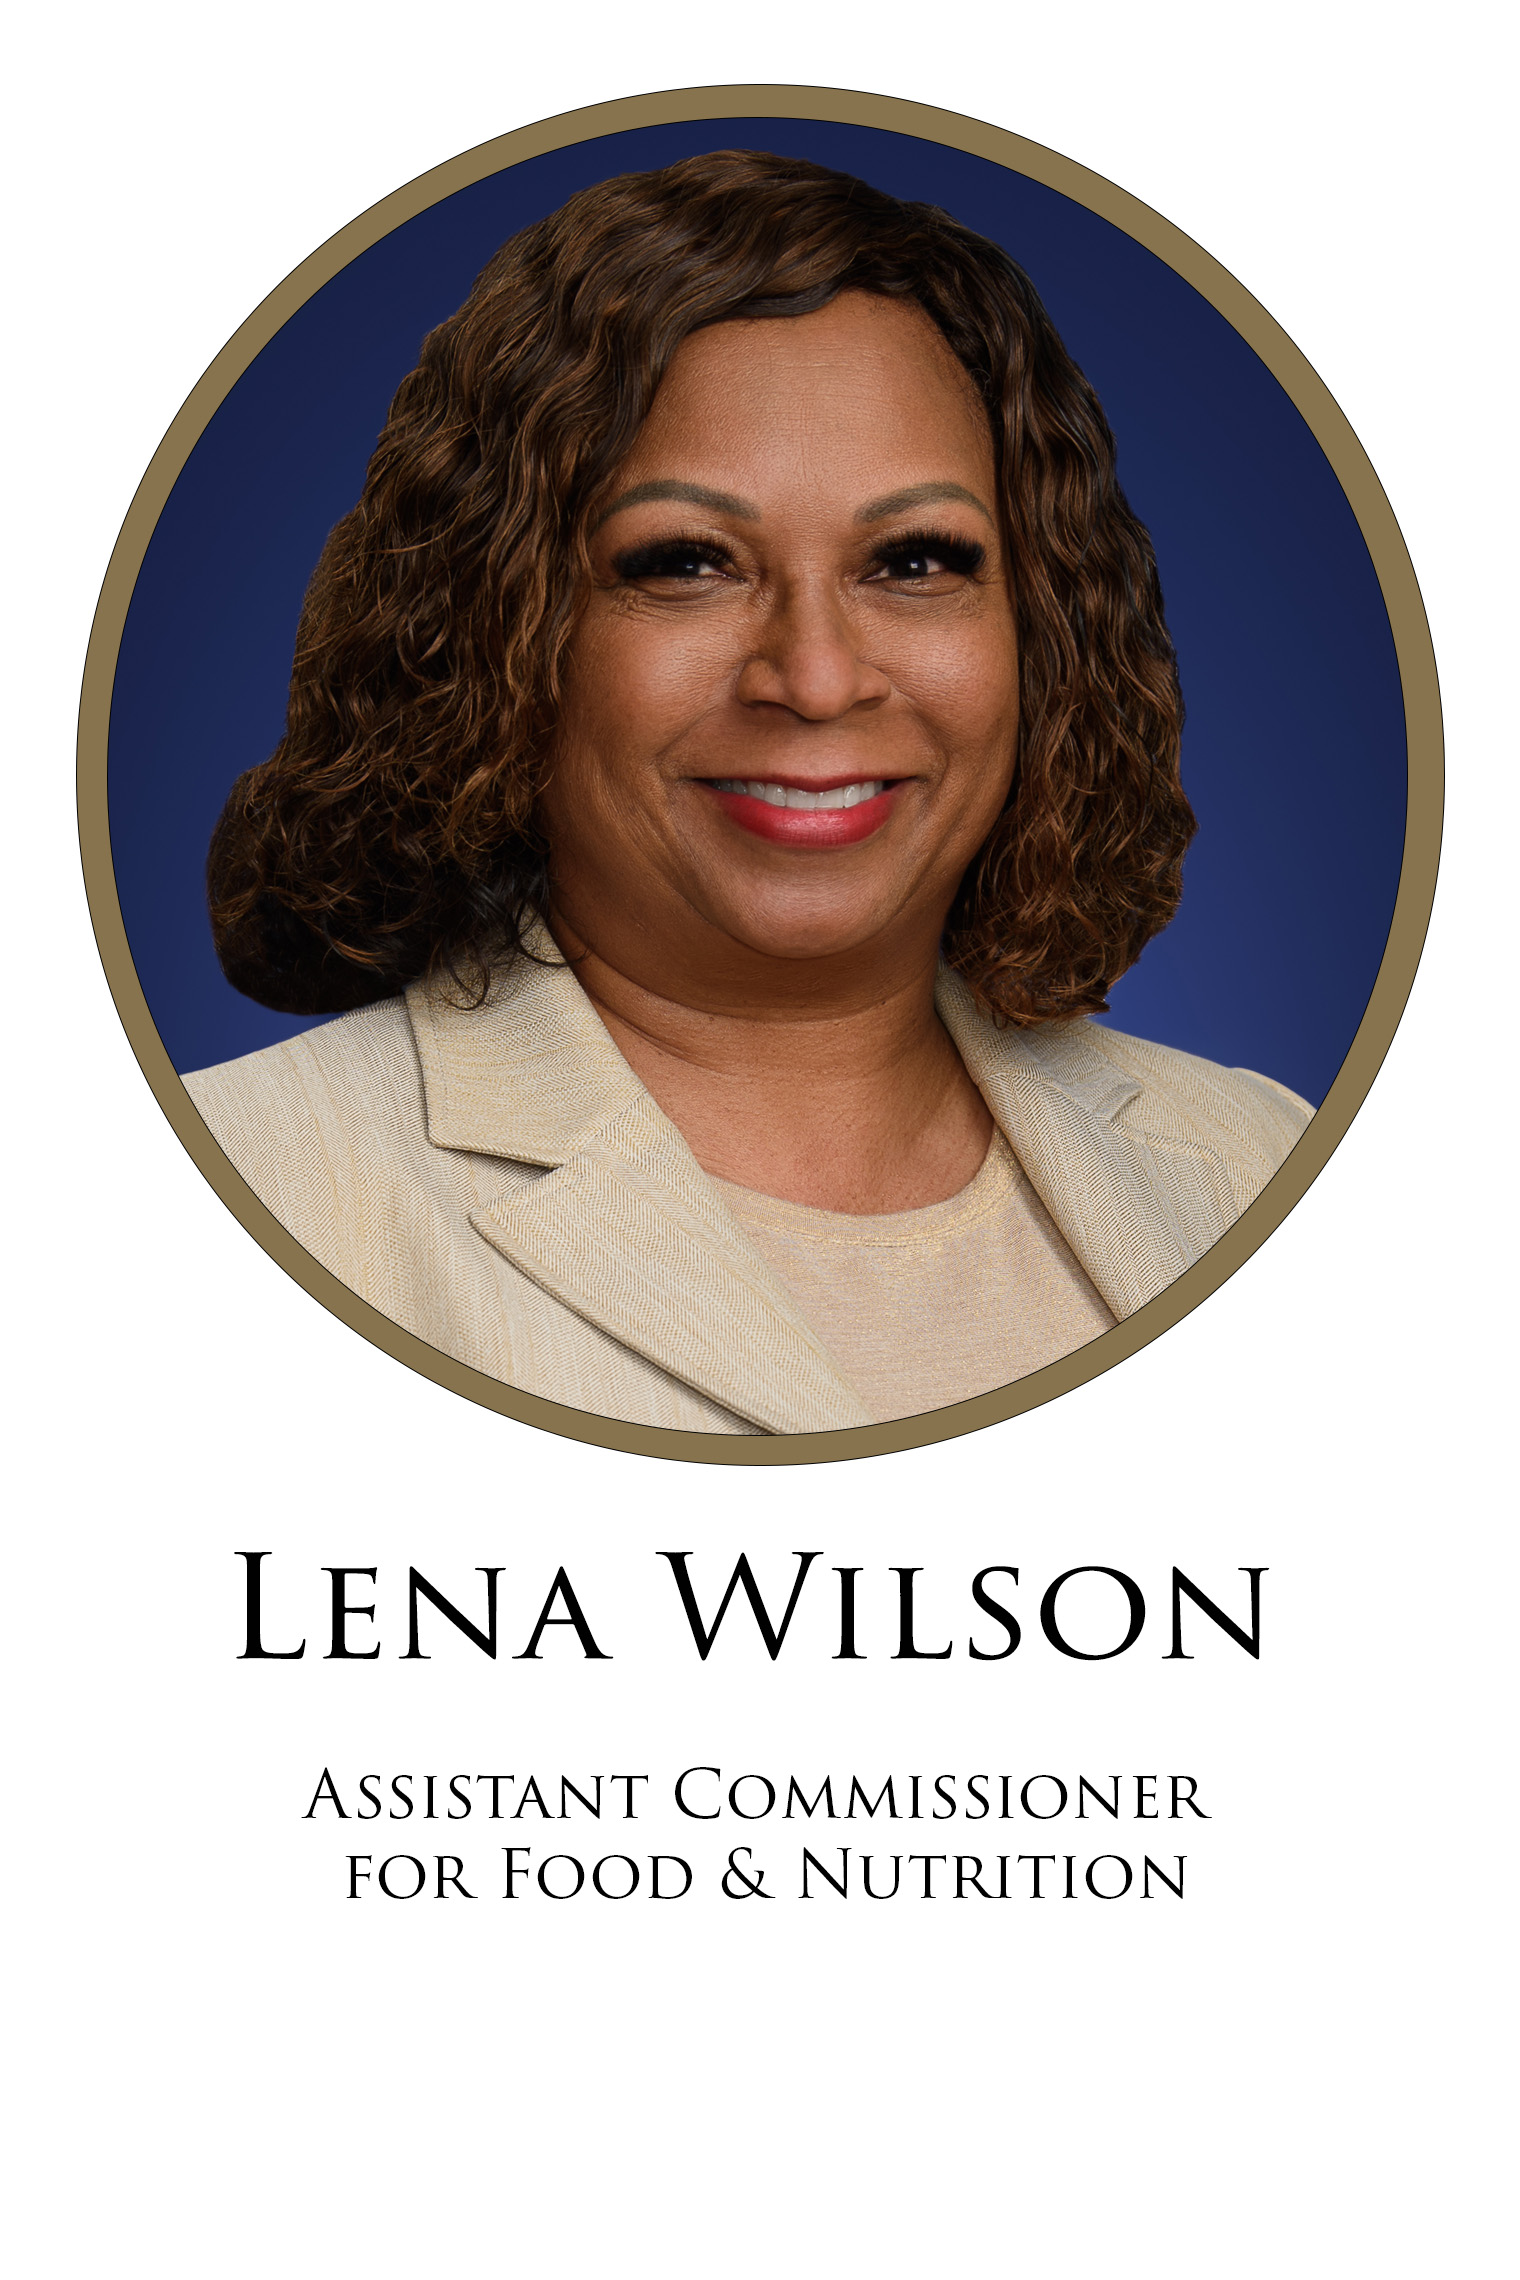 Lena Wilson, Assistant Commissioner for Food & Nutrition